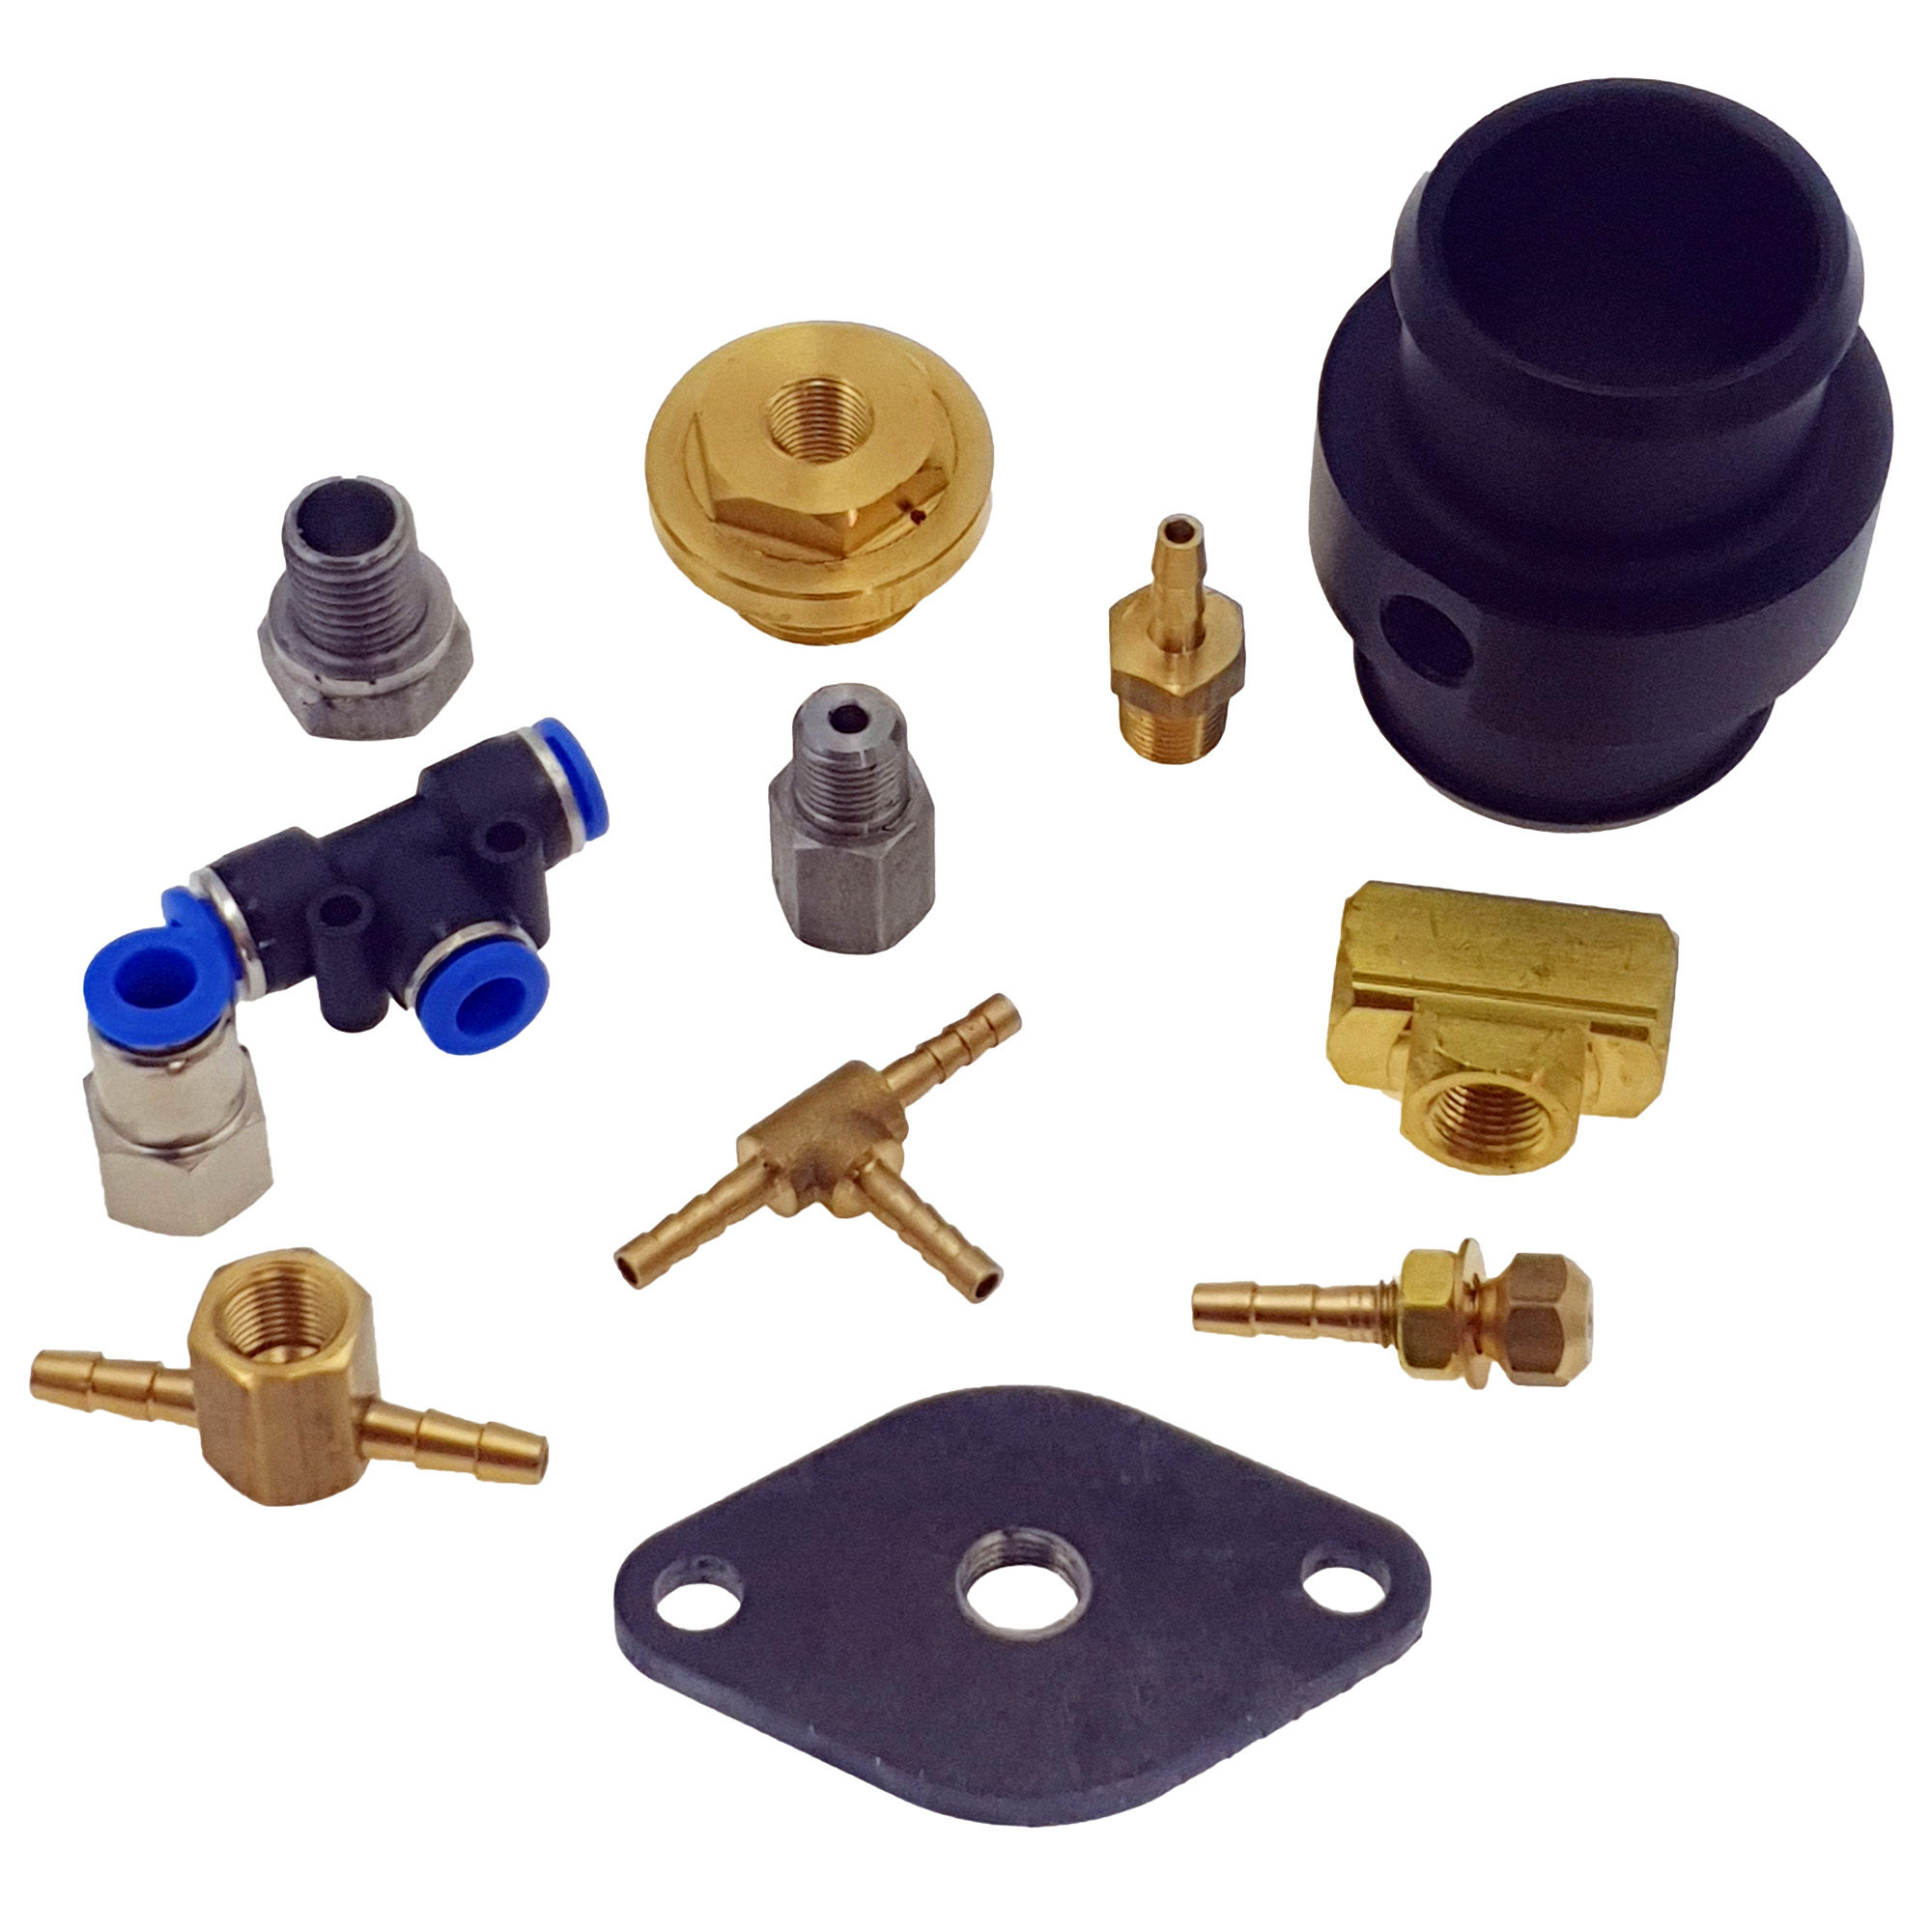 Adapters and Fittings